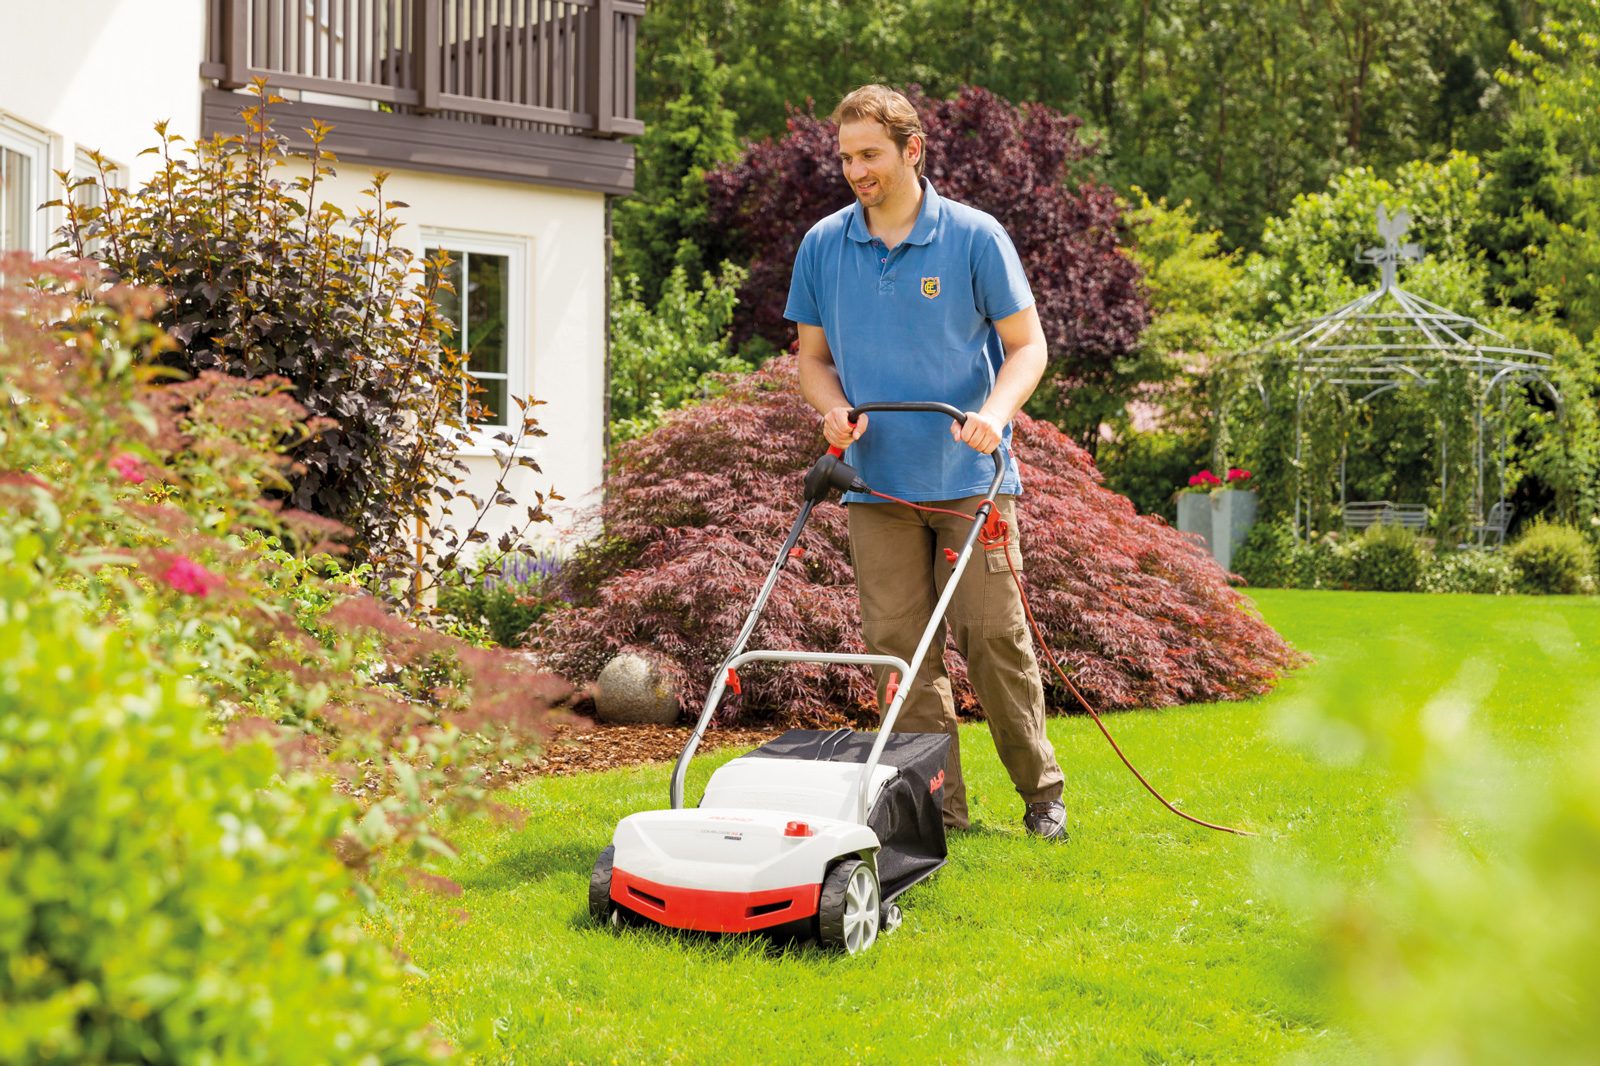 Scarifiers, or lawn care equipment